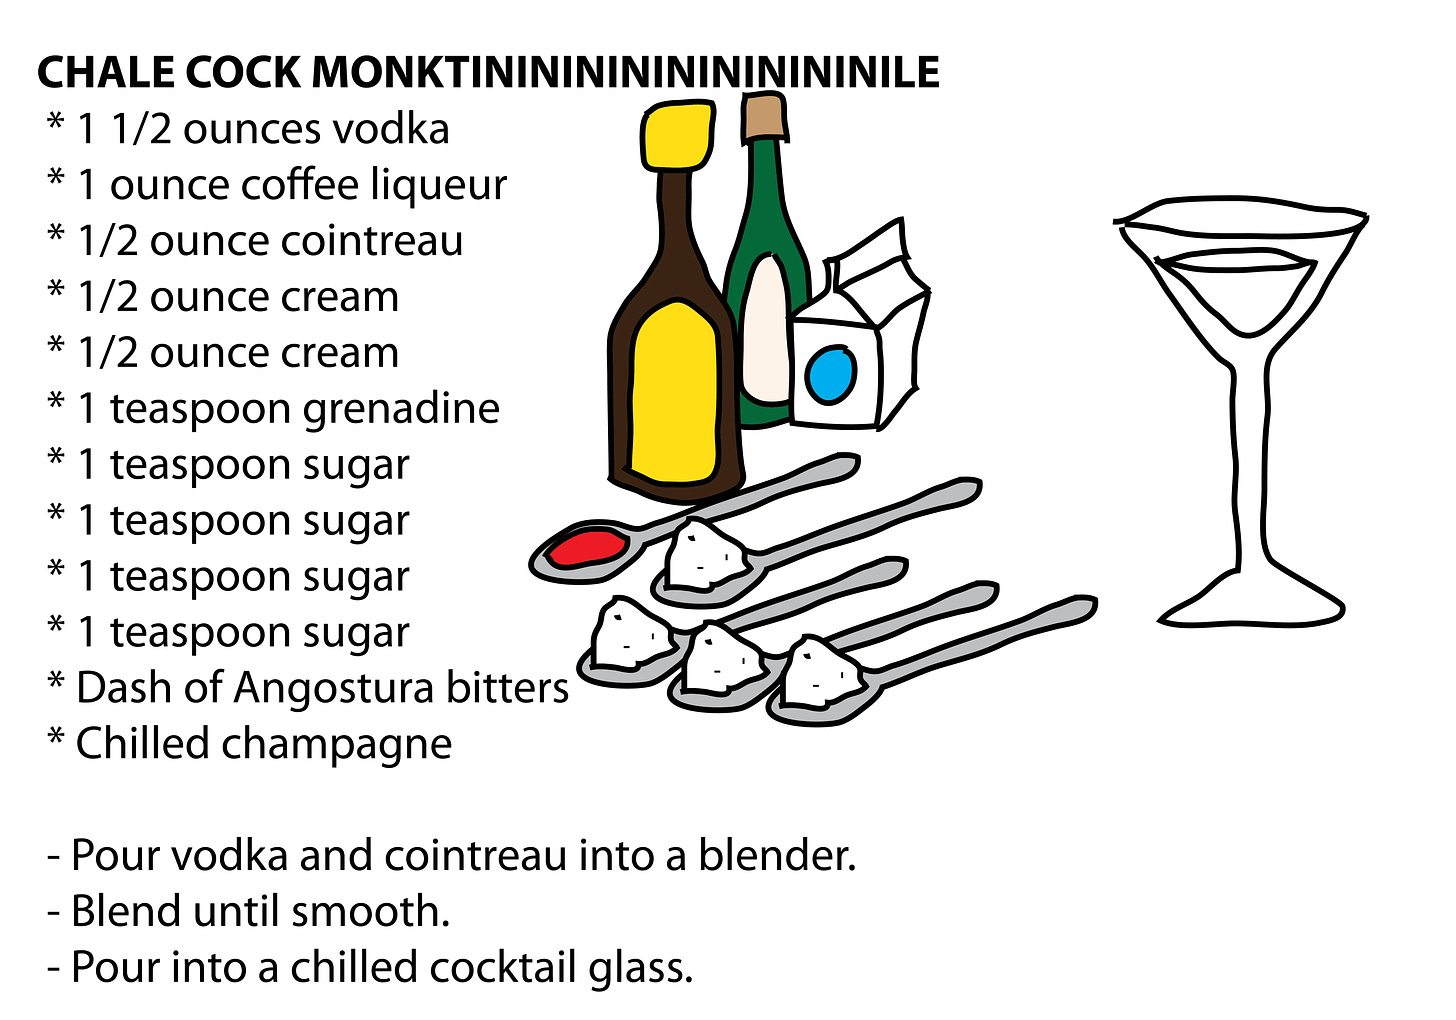 CHALE COCK MONKTINININININININININILE  * 1 1/2 ounces vodka  * 1 ounce coffee liqueur  * 1/2 ounce cointreau  * 1/2 ounce cream  * 1/2 ounce cream  * 1 teaspoon grenadine  * 1 teaspoon sugar  * 1 teaspoon sugar  * 1 teaspoon sugar  * 1 teaspoon sugar  * Dash of Angostura bitters  * Chilled champagne   - Pour vodka and cointreau into a blender.  - Blend until smooth.  - Pour into a chilled cocktail glass.